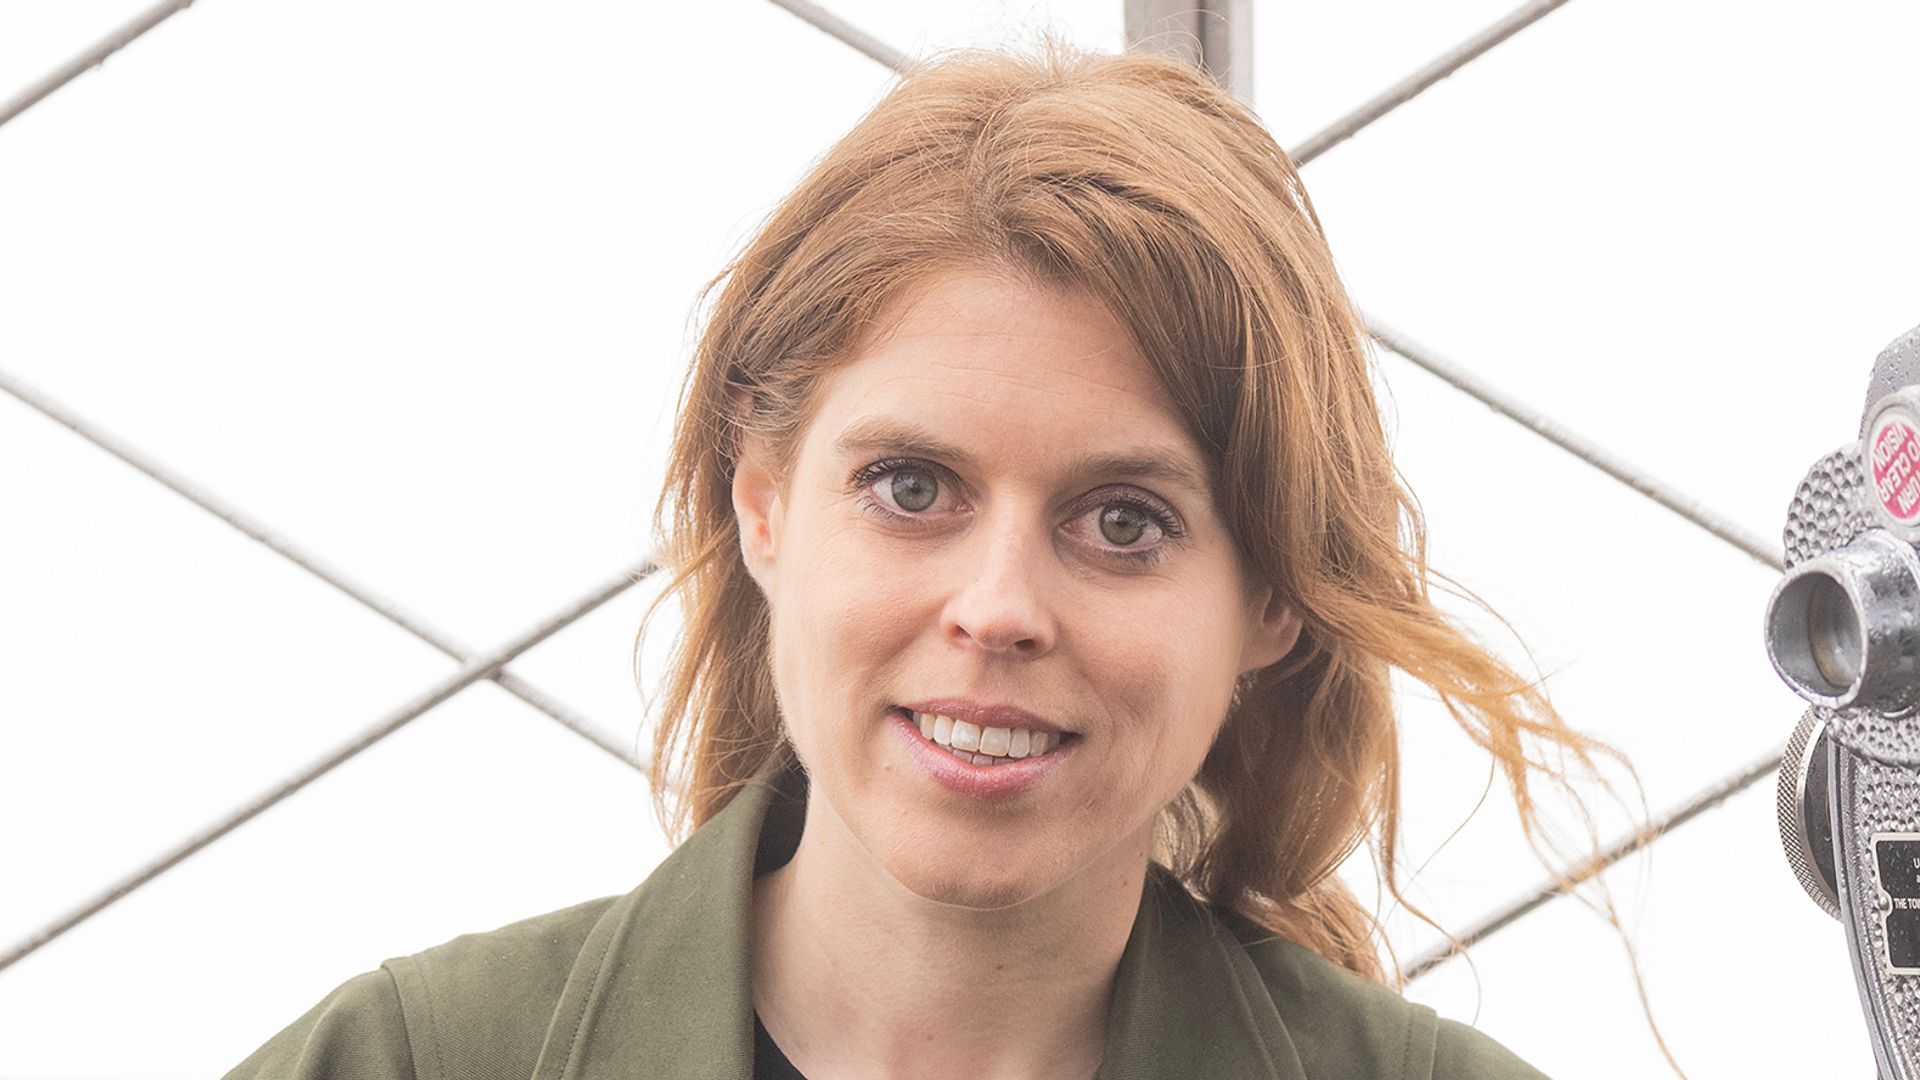 Princess Beatrice wows in super silky skirt and rarely-worn trainers